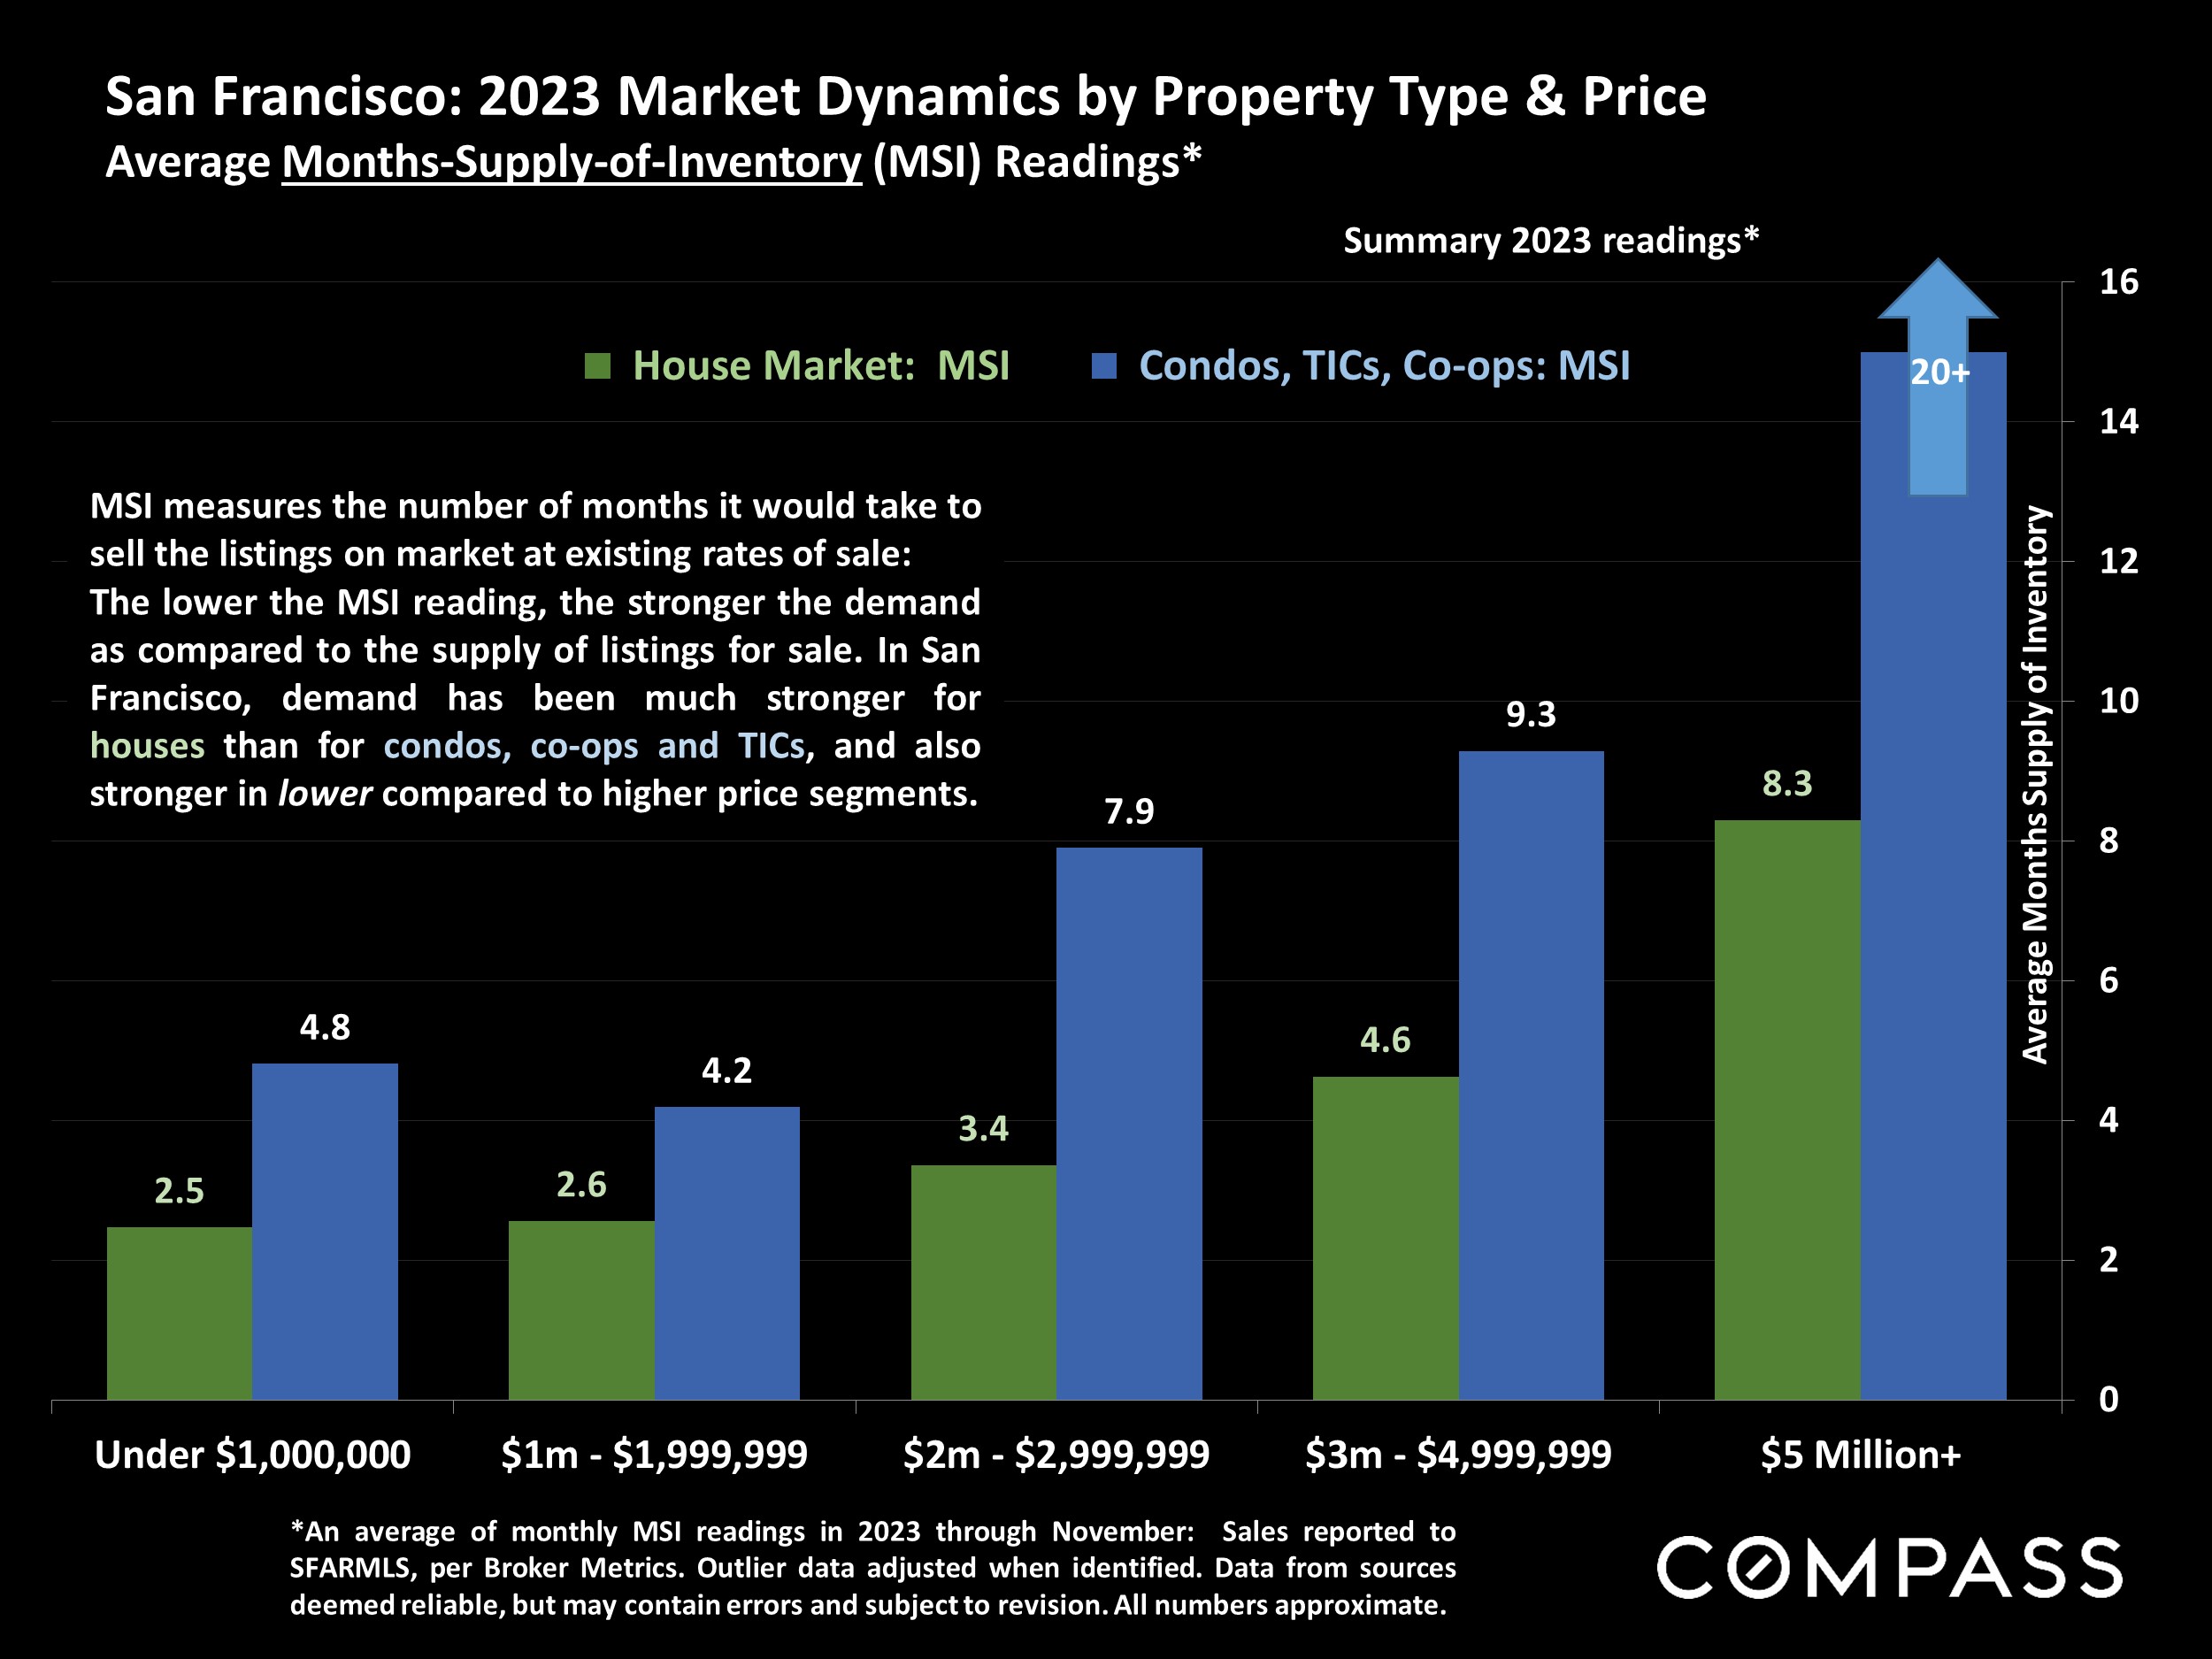 San Francisco: 2023 Market Dynamics by Property Type & Price Average Months-Supply-of-Inventory (MSI) Readings*